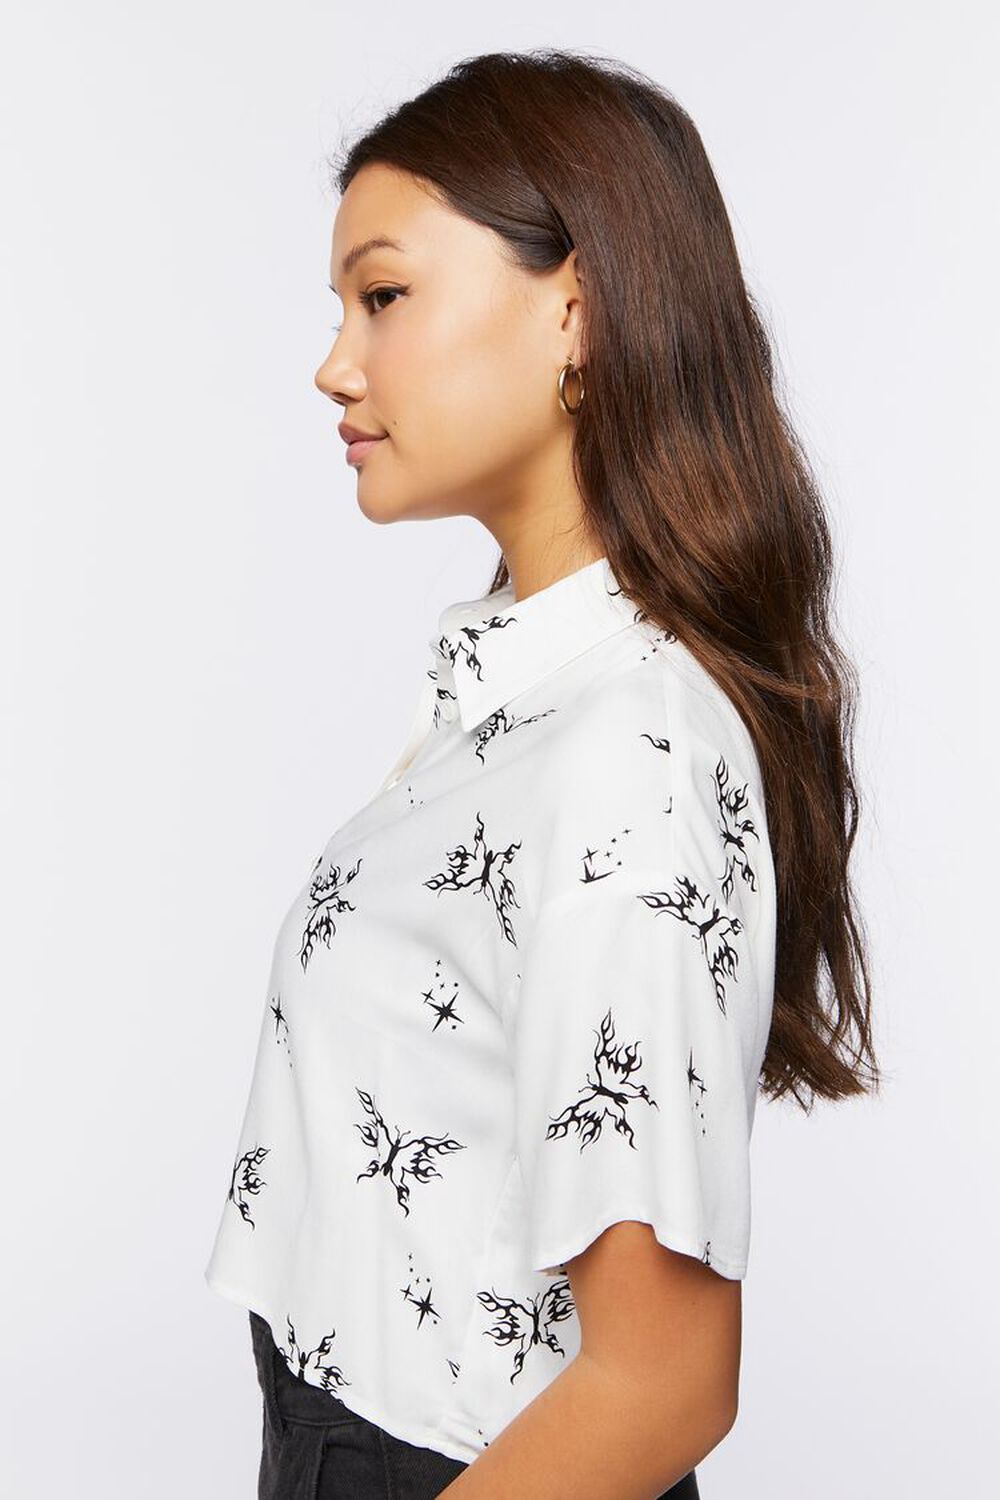 WHITE/BLACK Butterfly Print Cropped Shirt, image 2